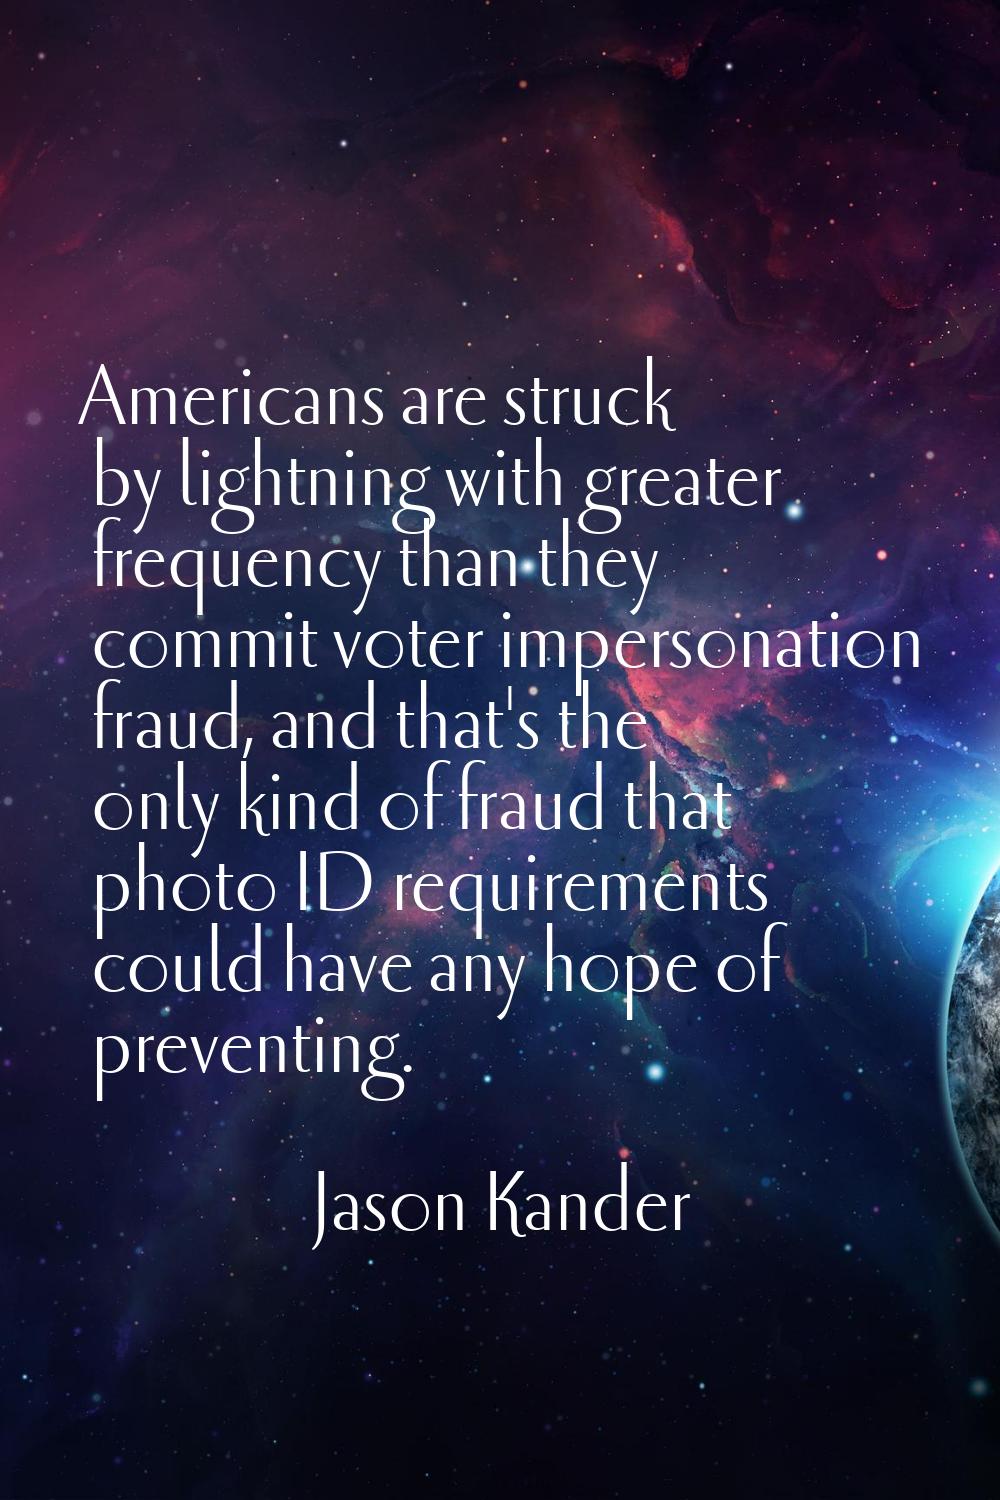 Americans are struck by lightning with greater frequency than they commit voter impersonation fraud